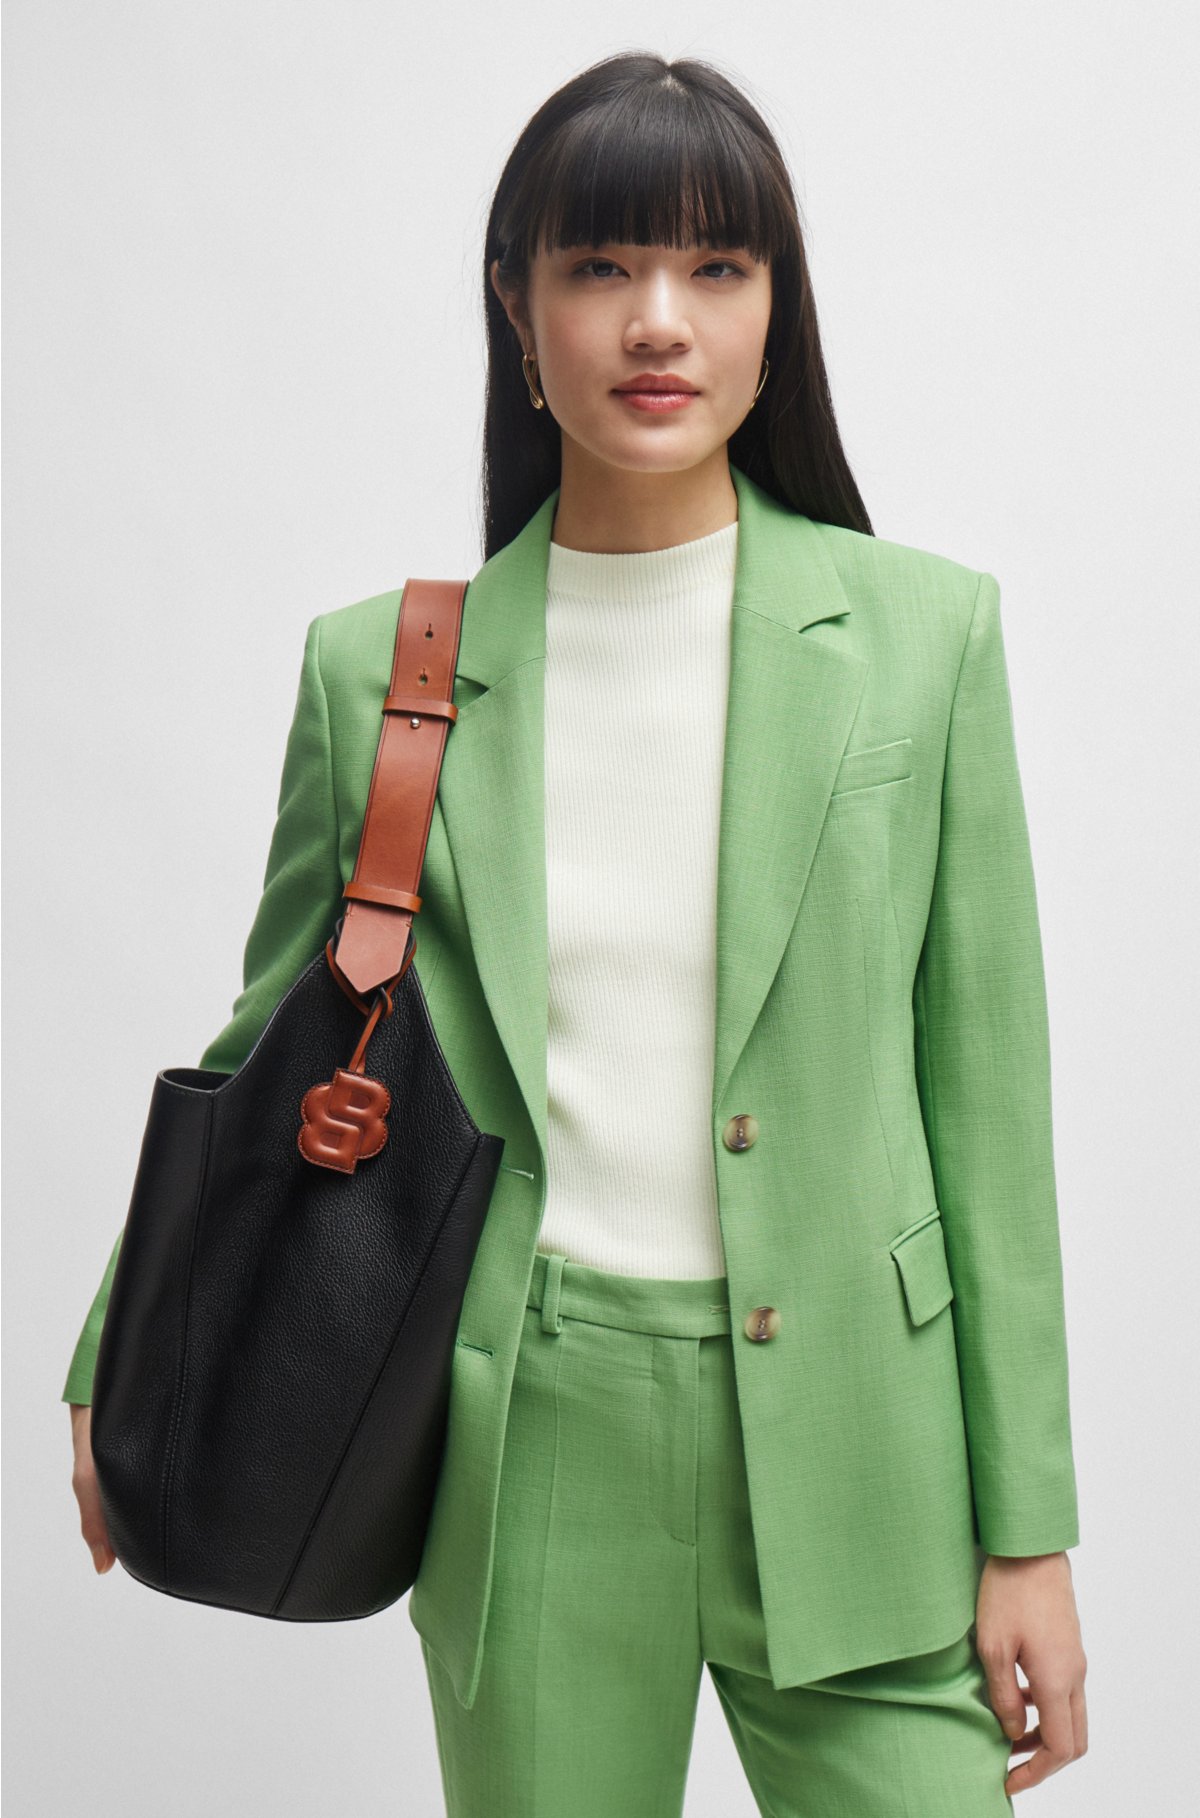 Single-breasted jacket in stretch fabric, Green